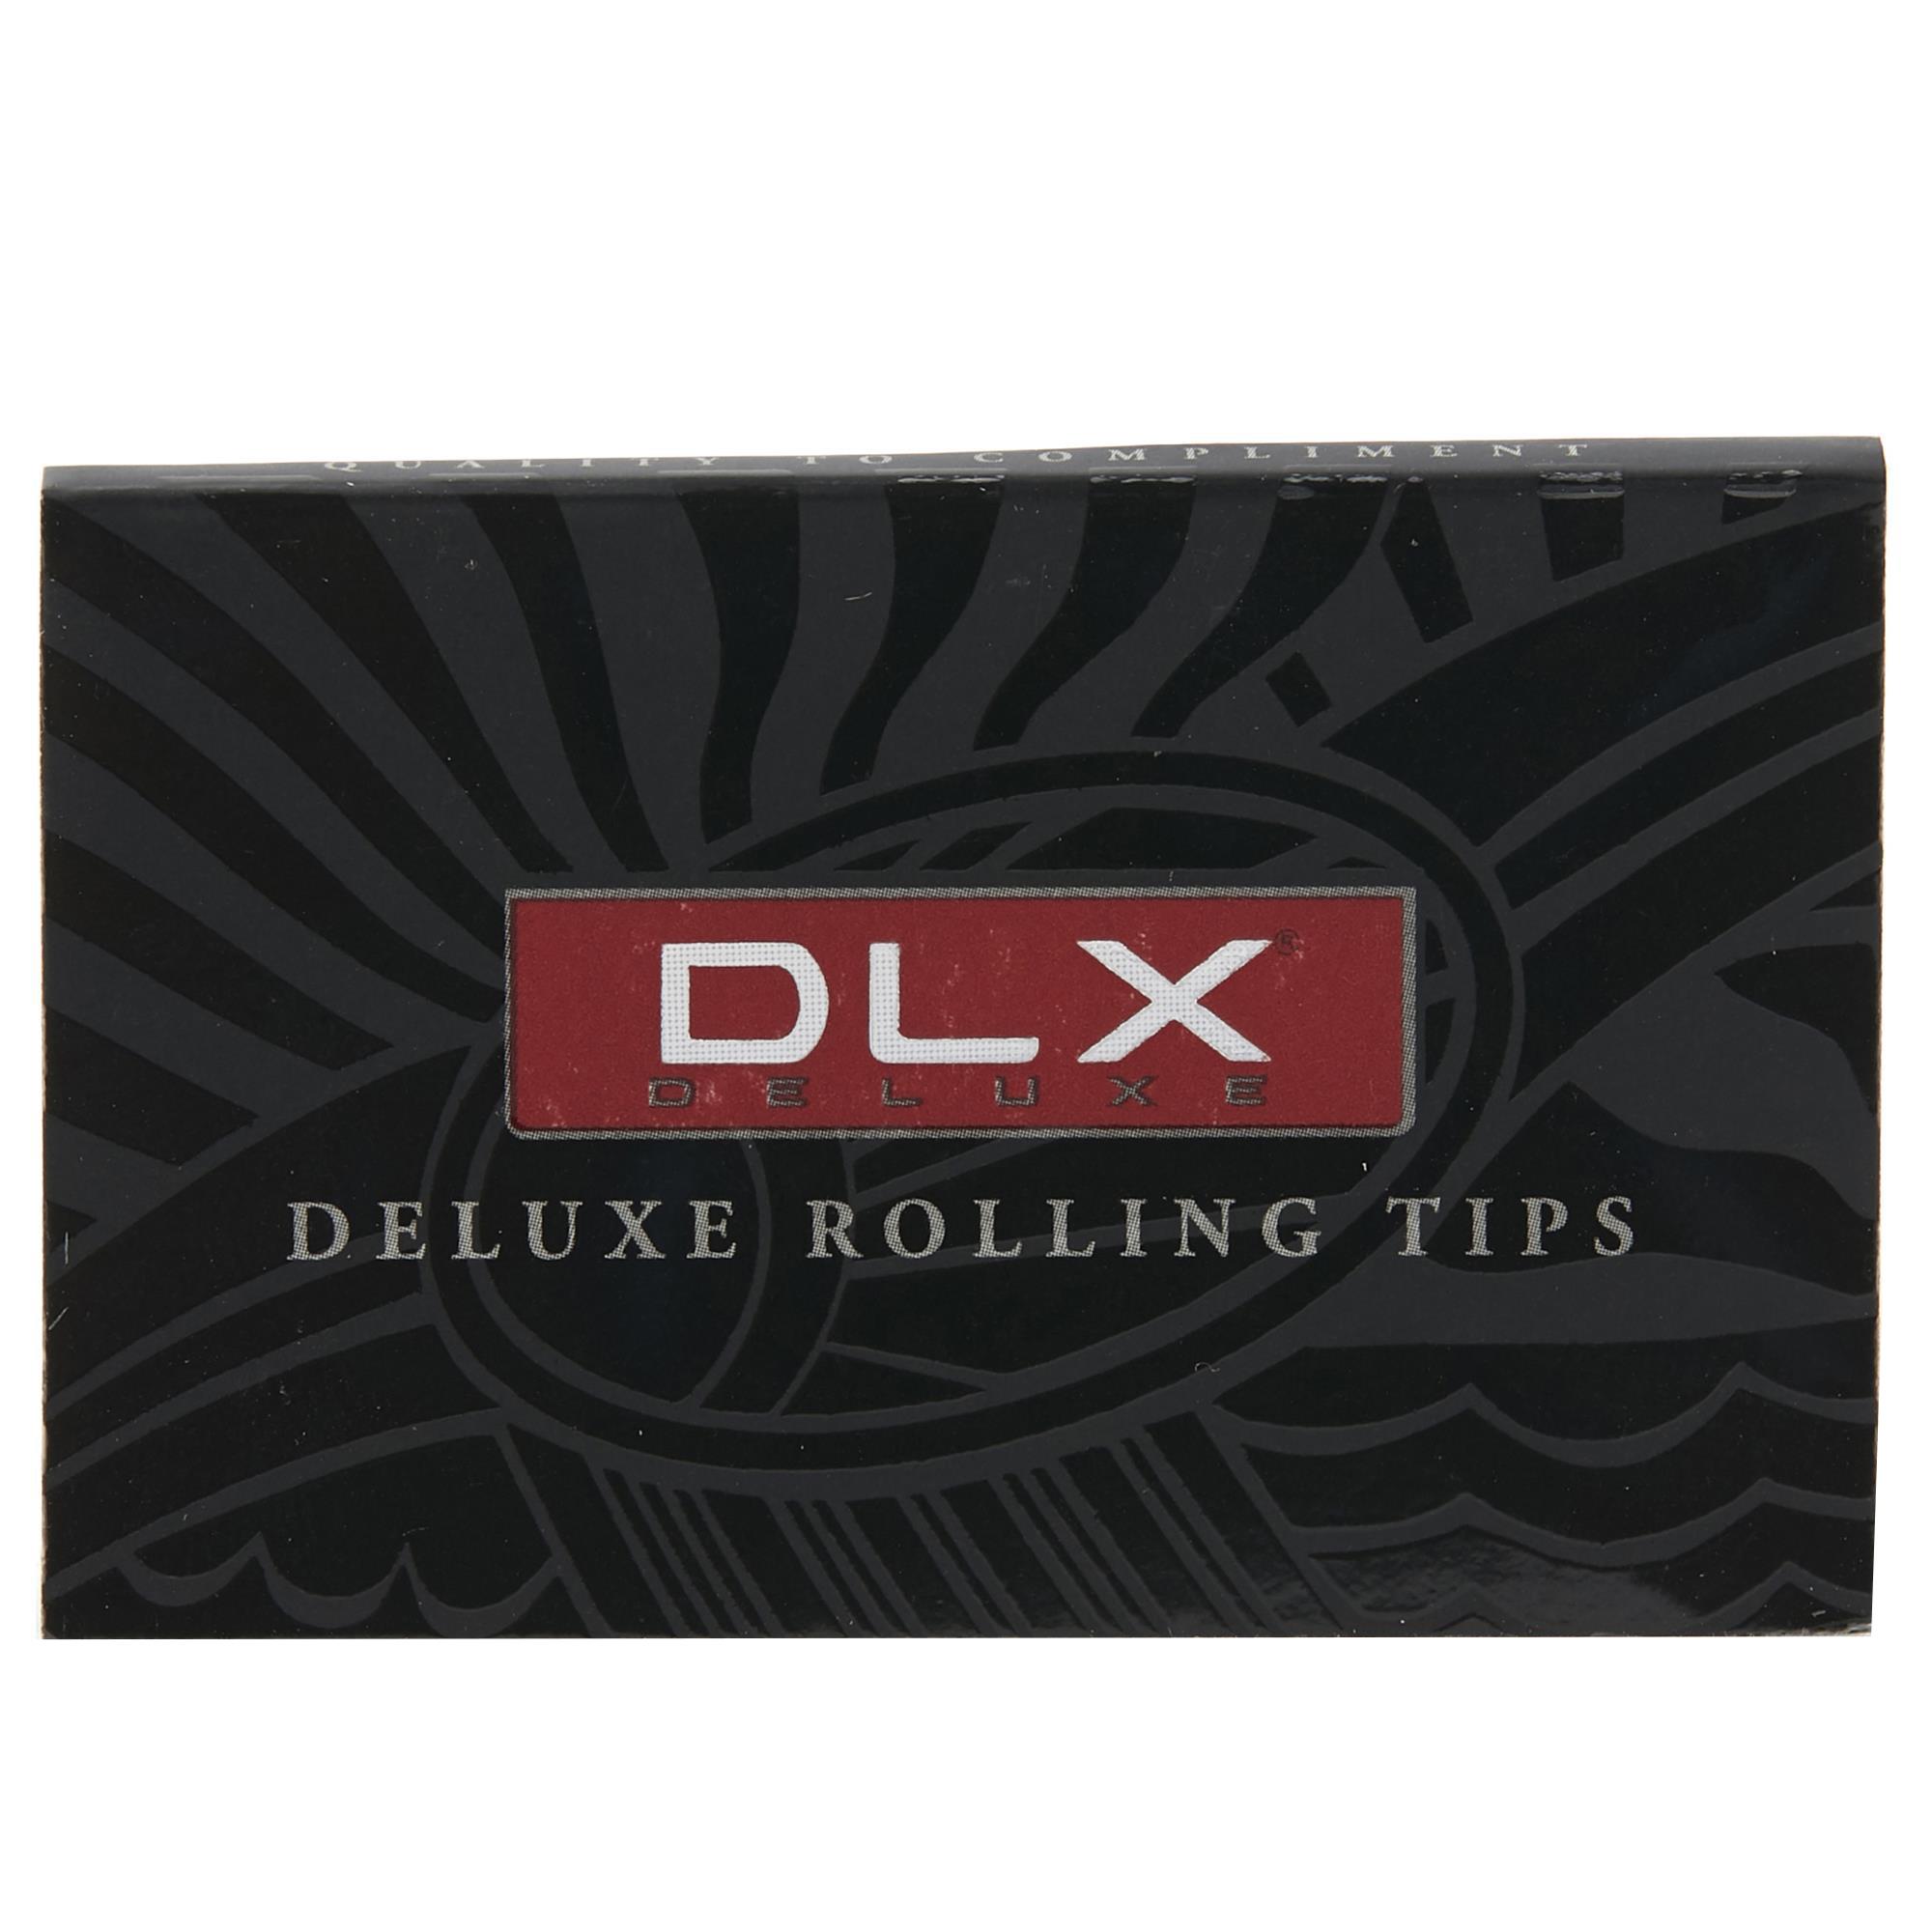 DLX ROLLING TIPS